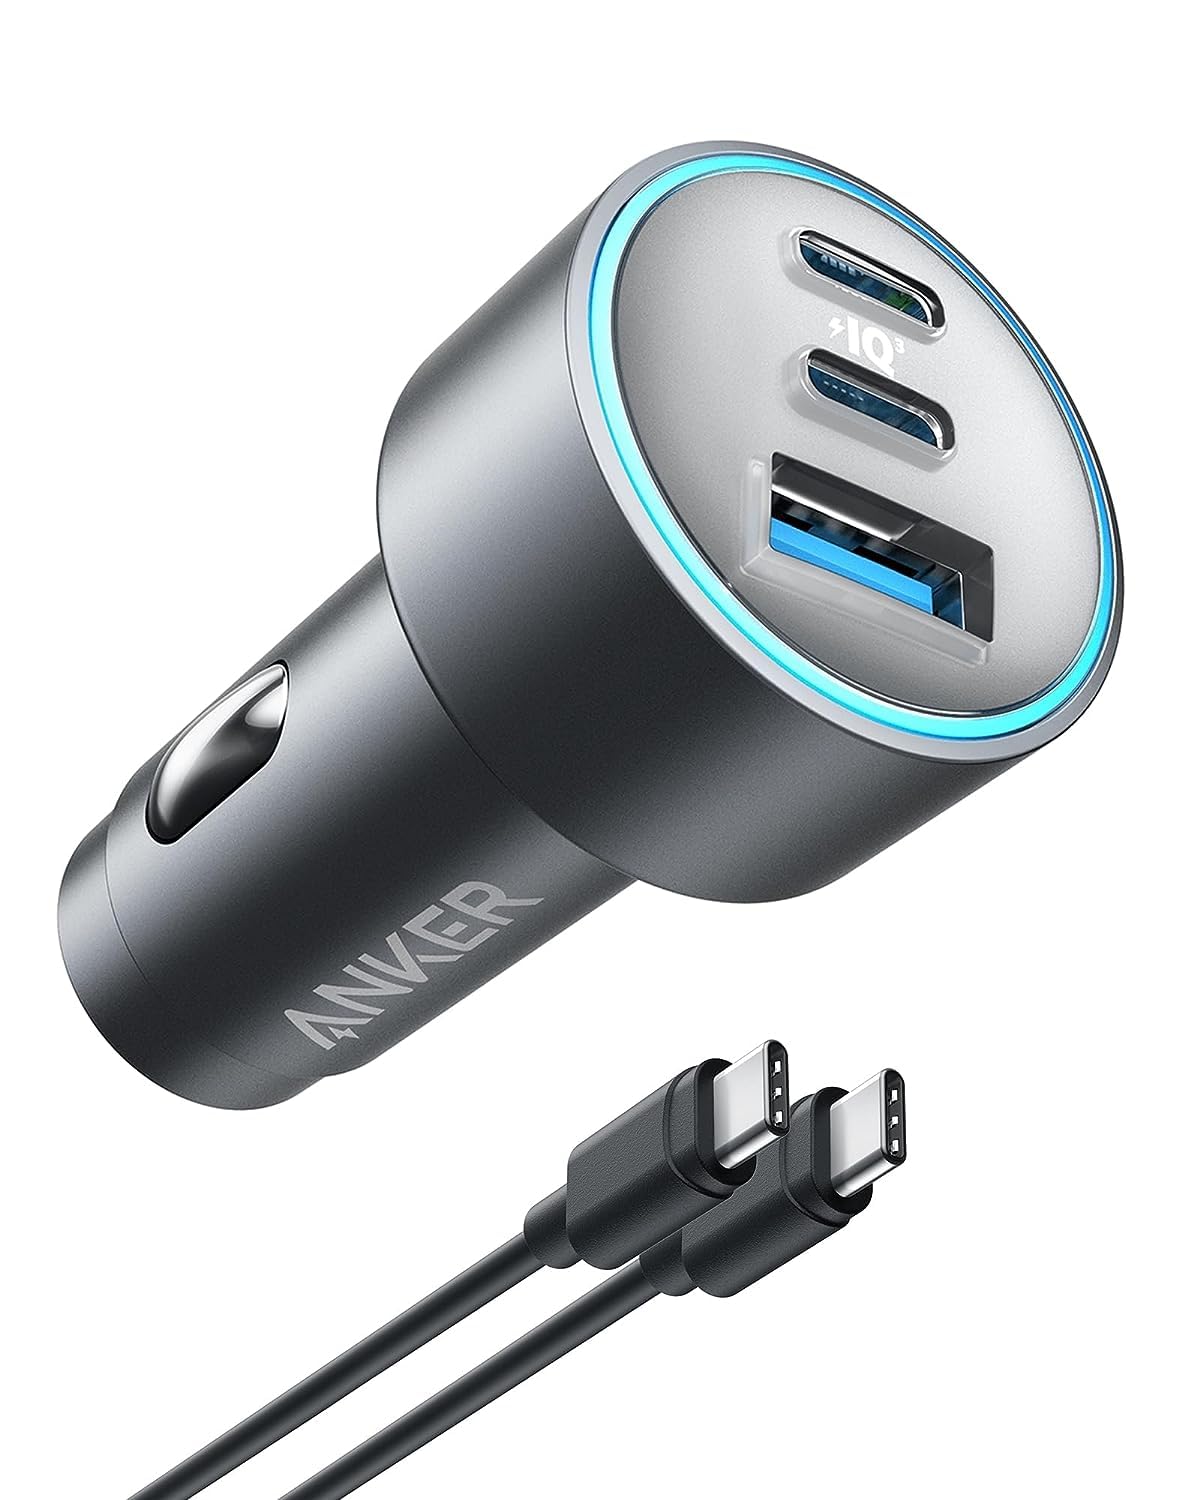 Anker 67W USB-C Car Charger - Anker US